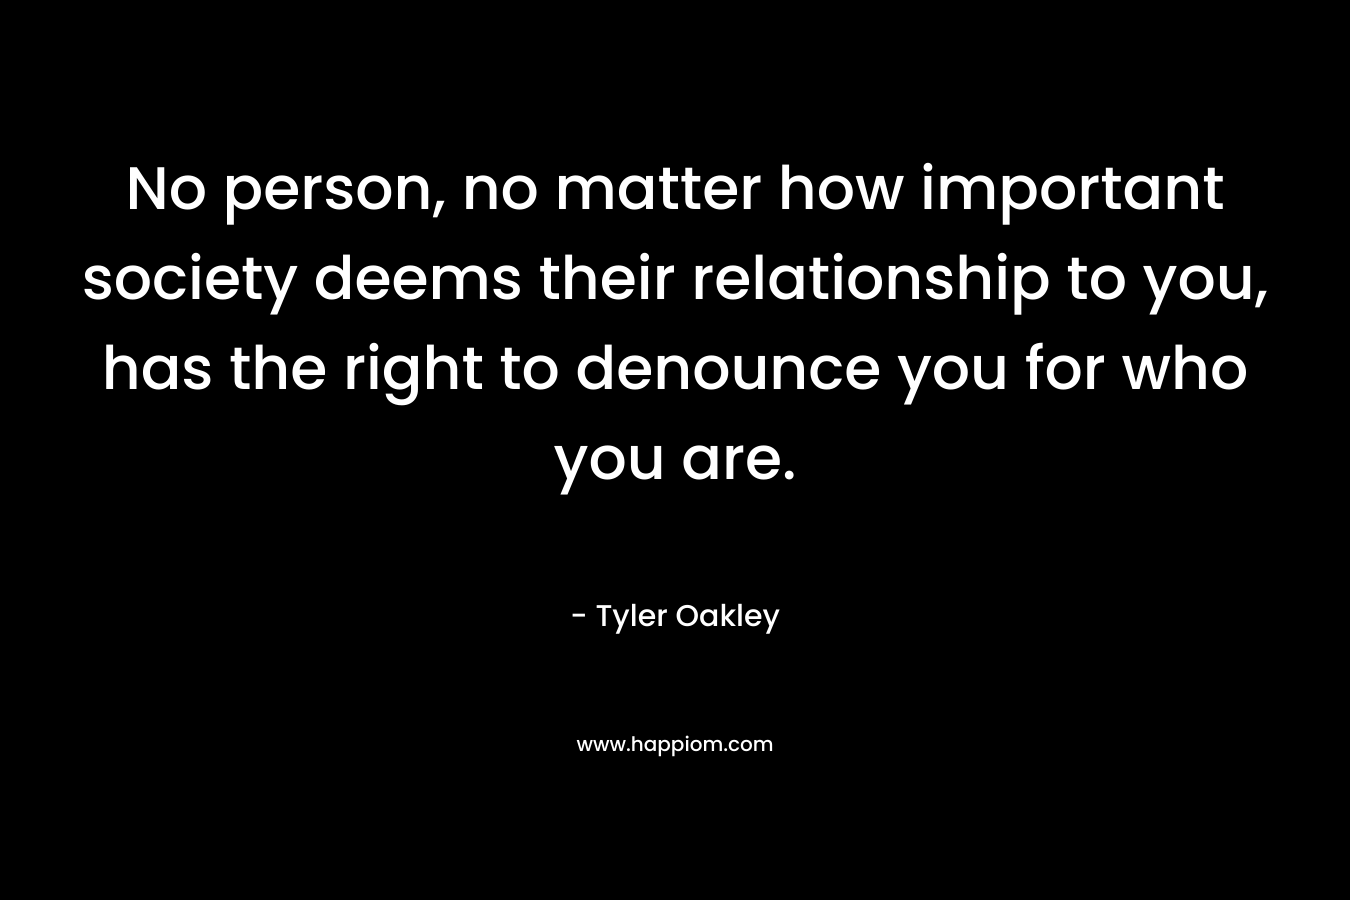 No person, no matter how important society deems their relationship to you, has the right to denounce you for who you are. – Tyler Oakley